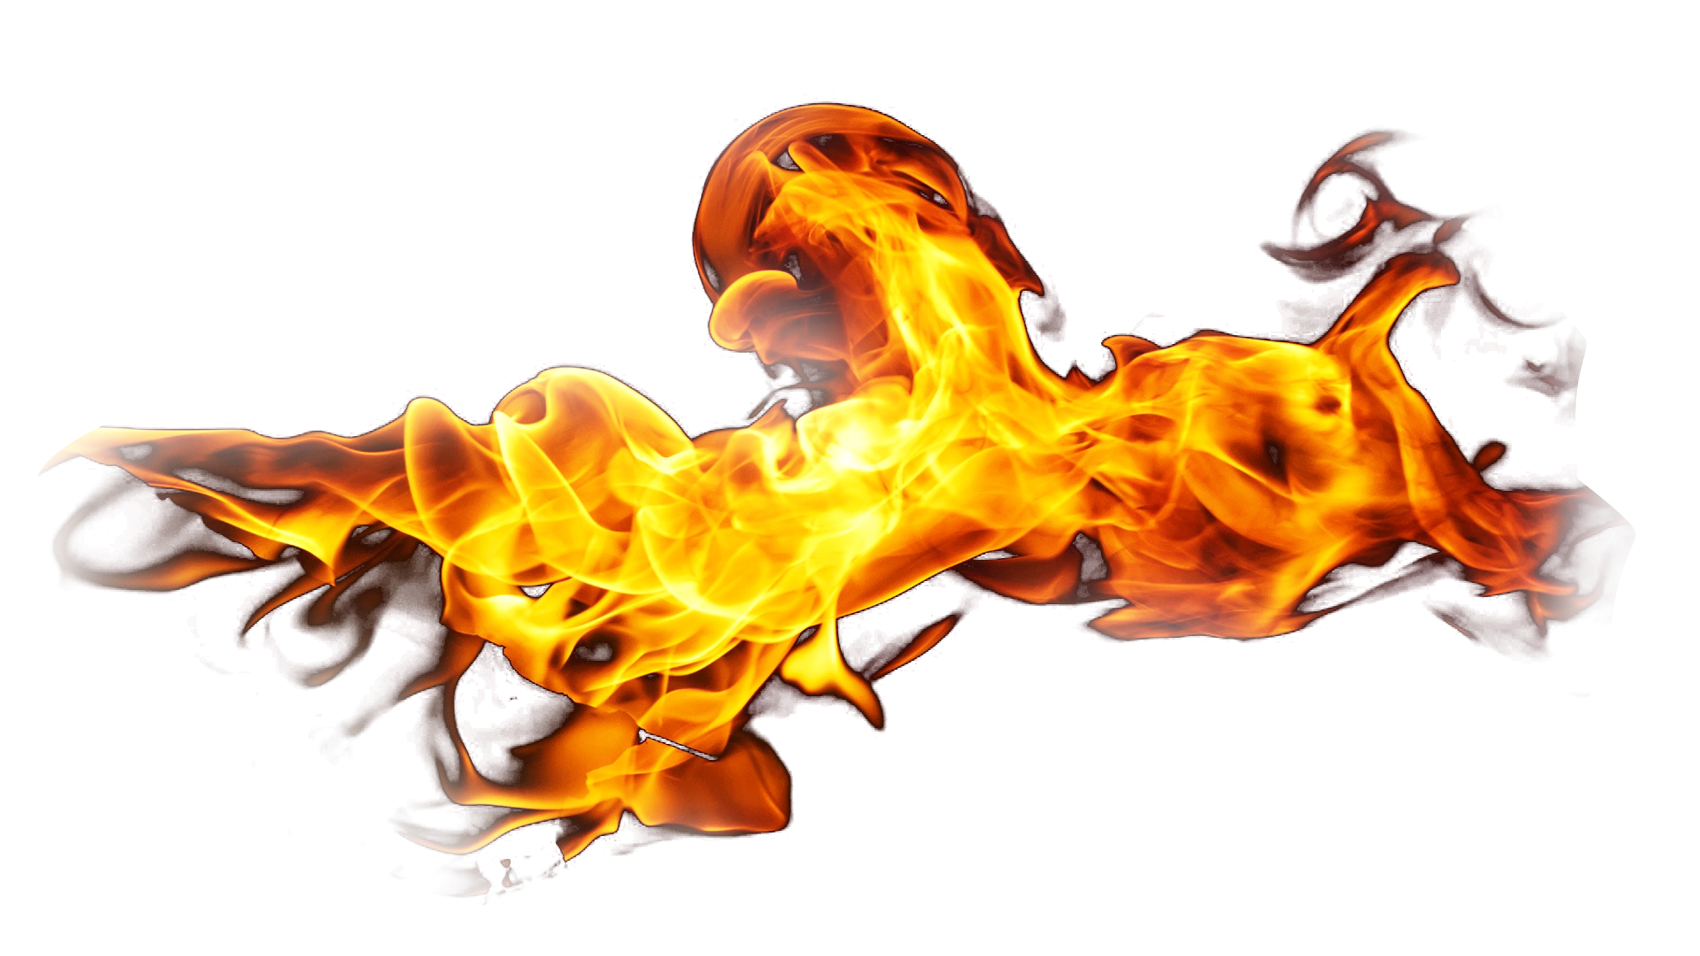 Fire Png Stock Photos - 17,057 Images